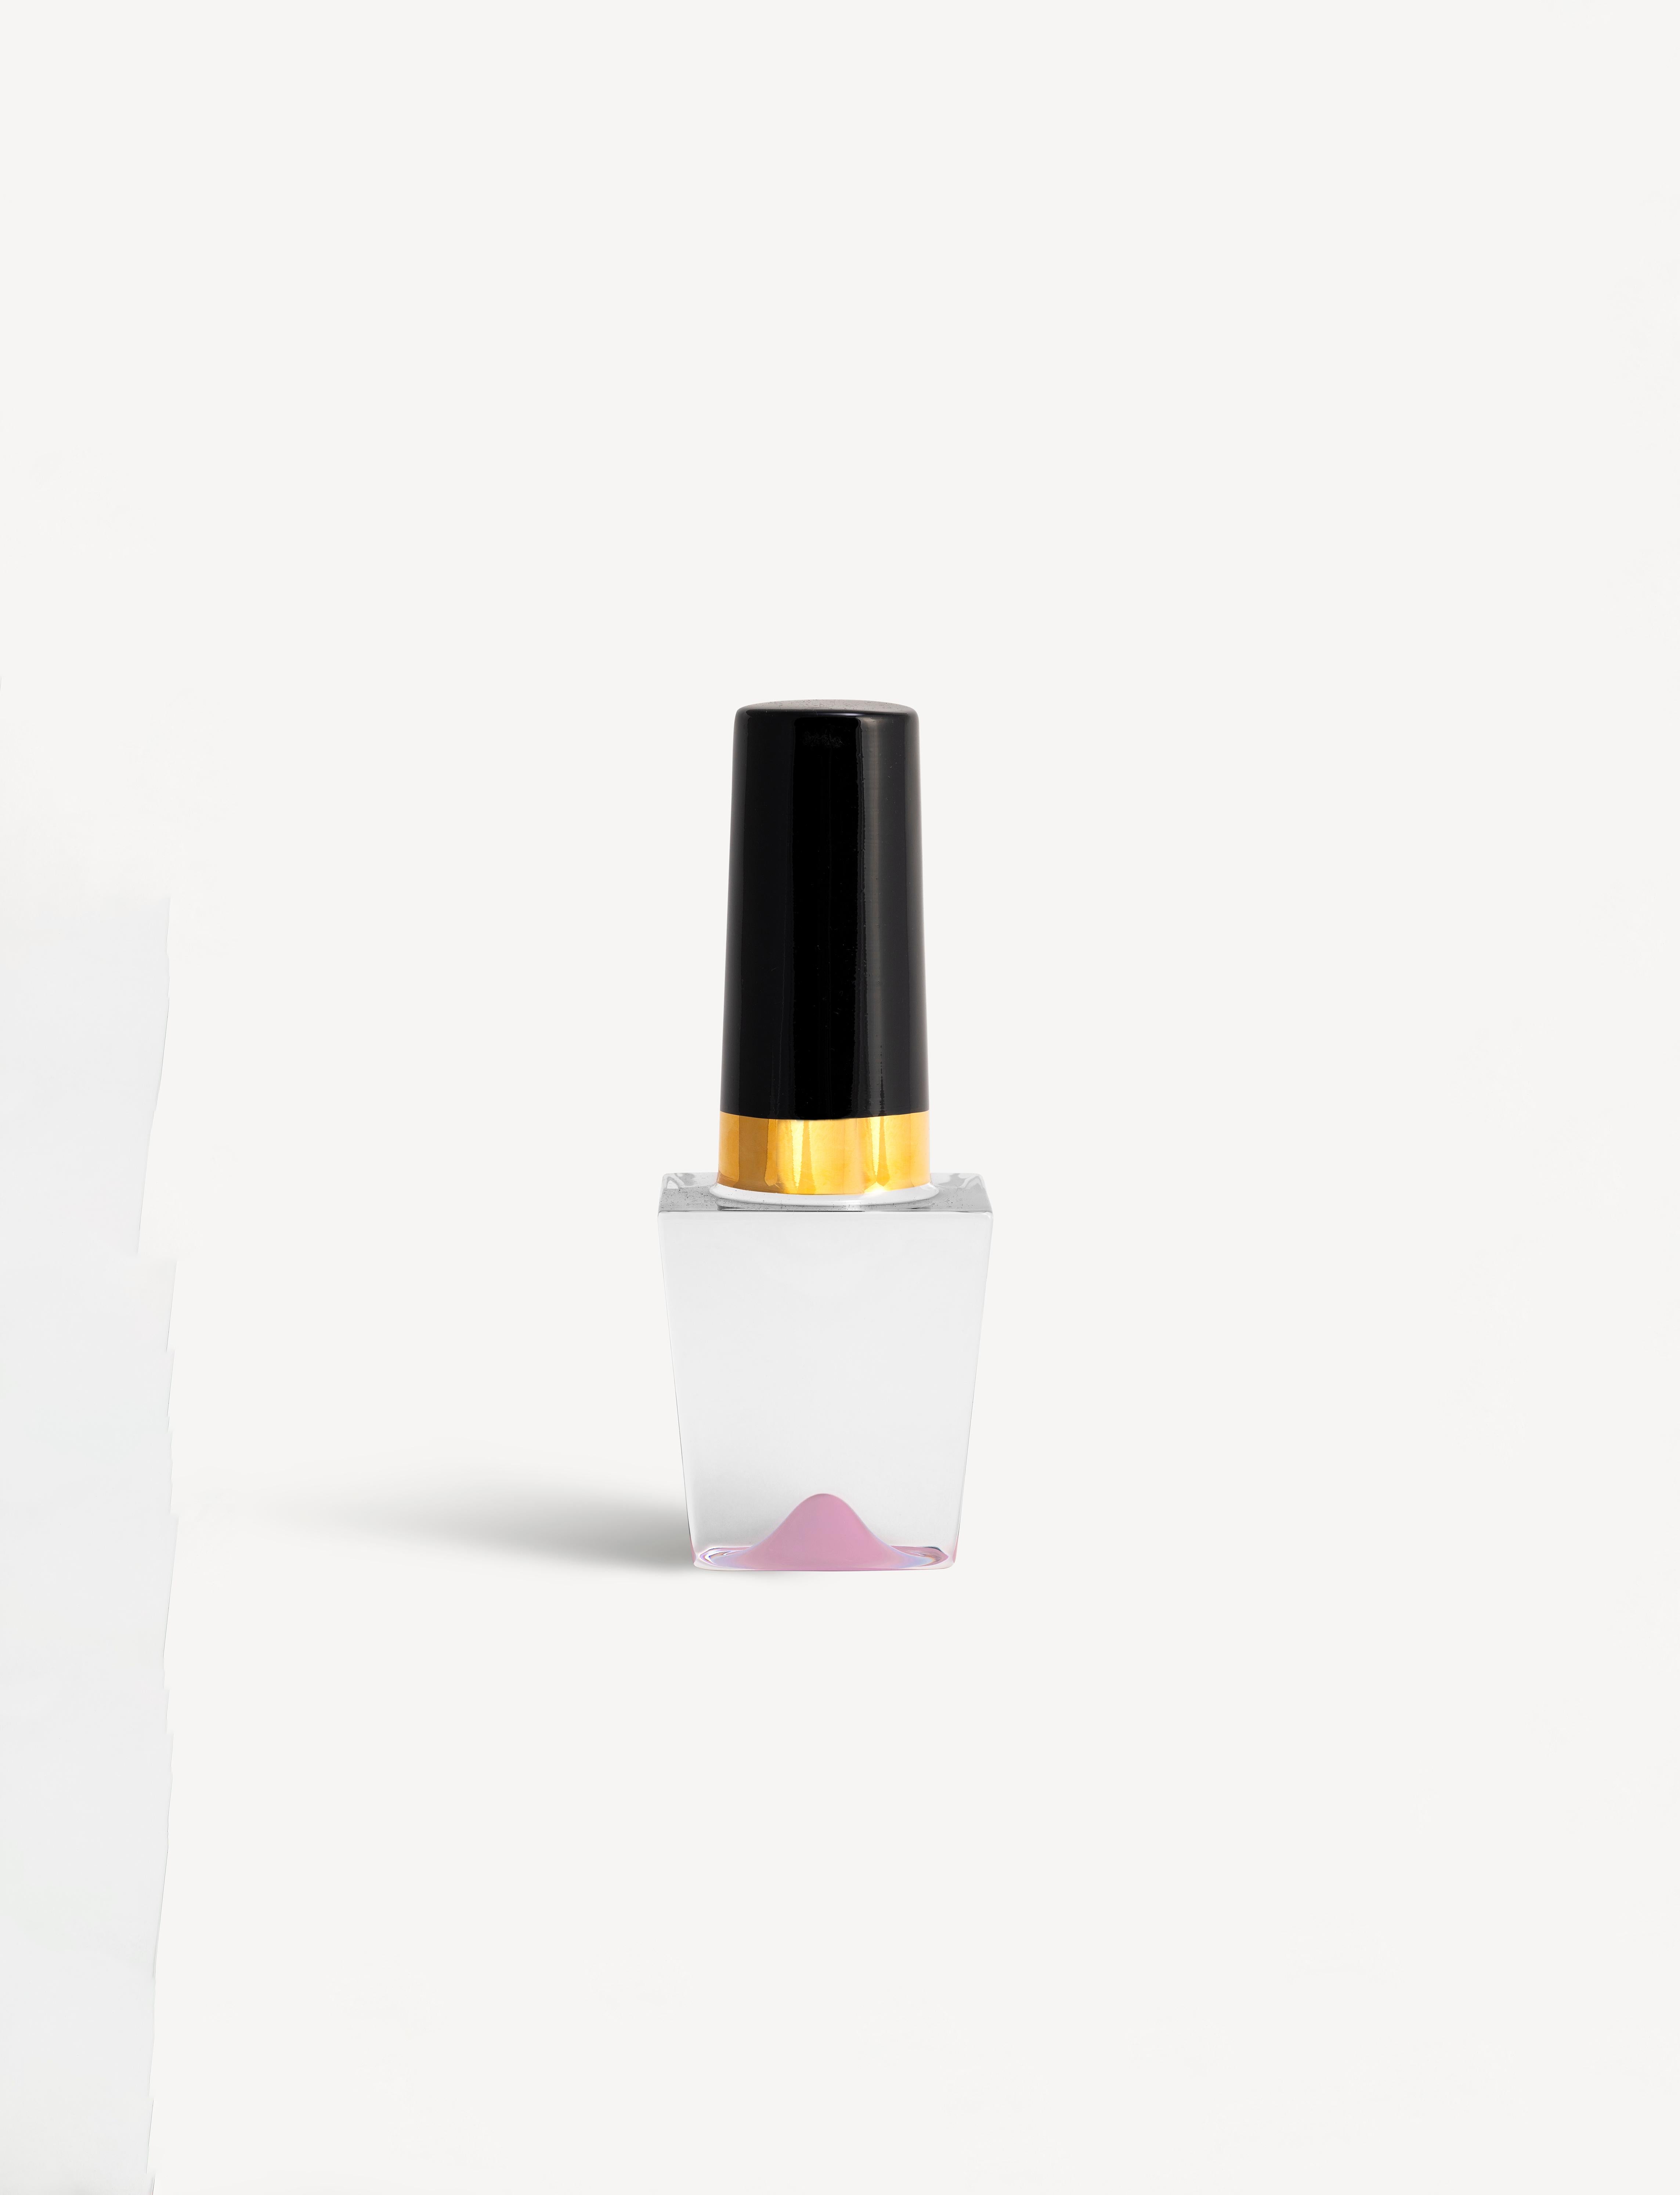 Shake it up with Make Up! The nail polish from Kosta Boda’s collection, first launched in 2008, is a pressed glass sculpture painted by hand. In its early days, the collection became a political and feministic statement as a mini version of Åsa